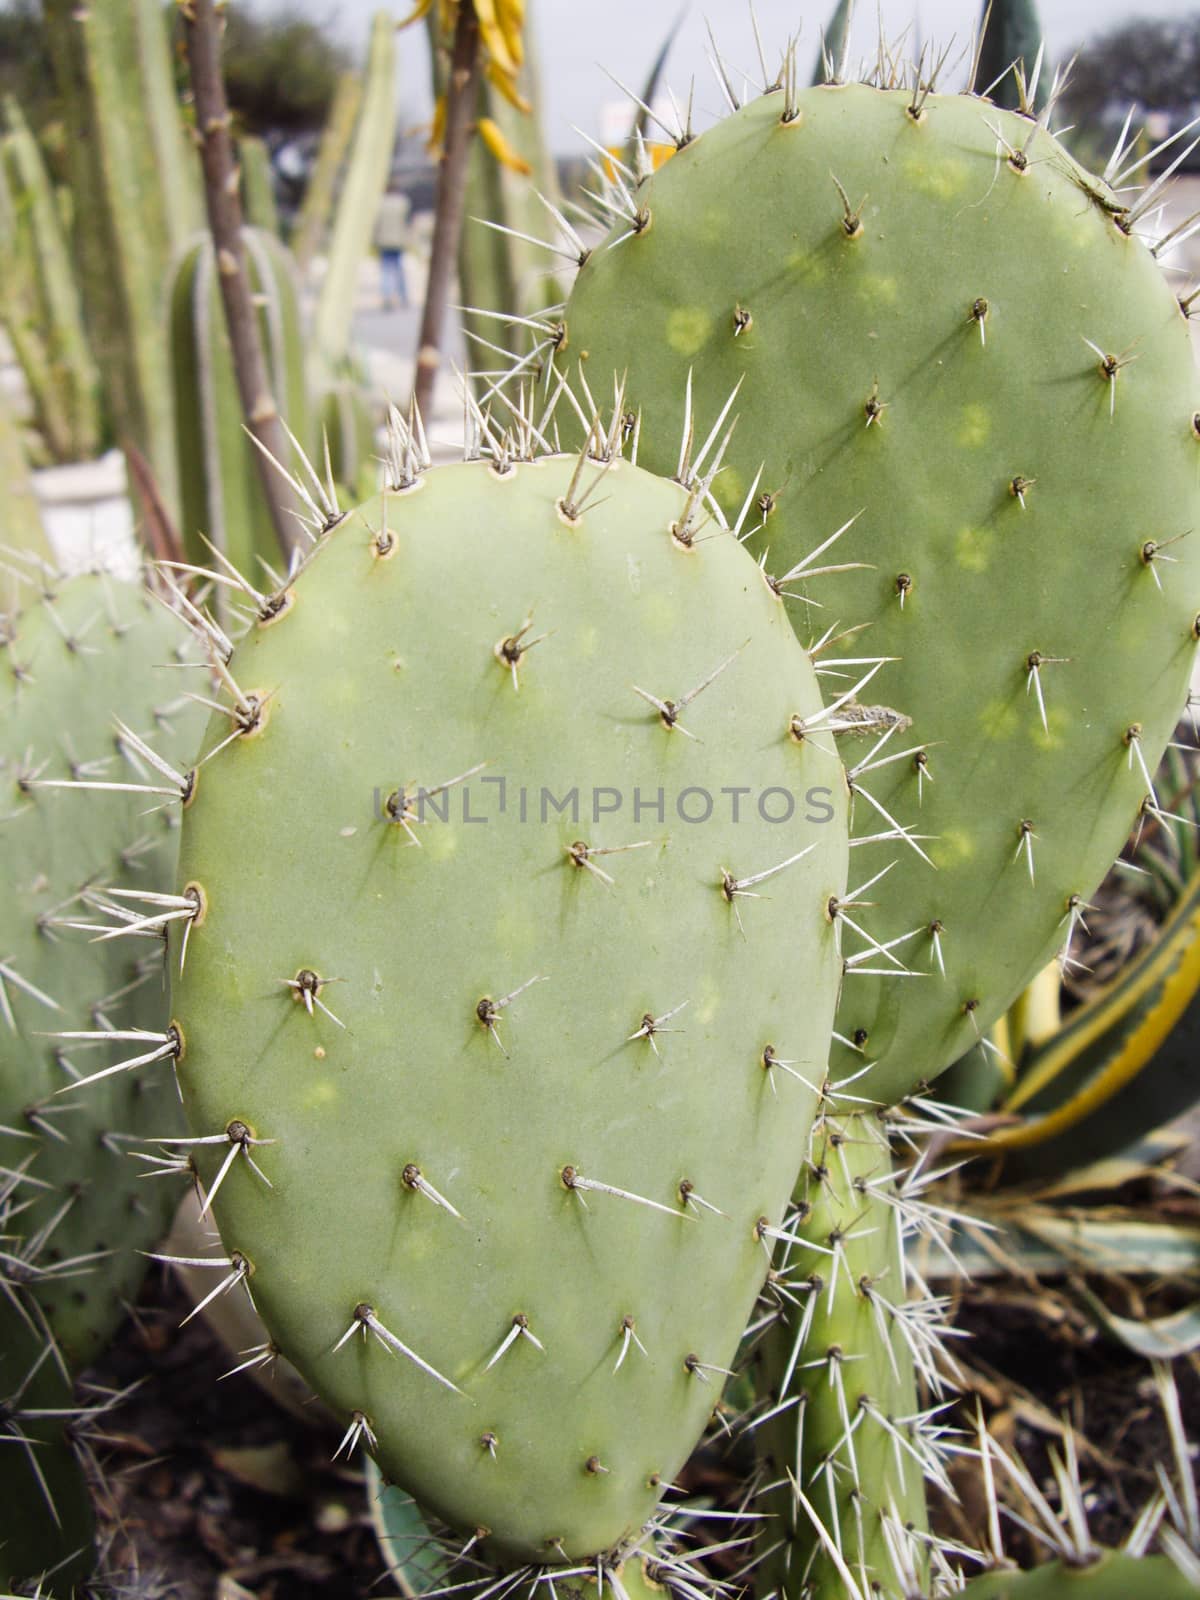 Desert cactus with spines